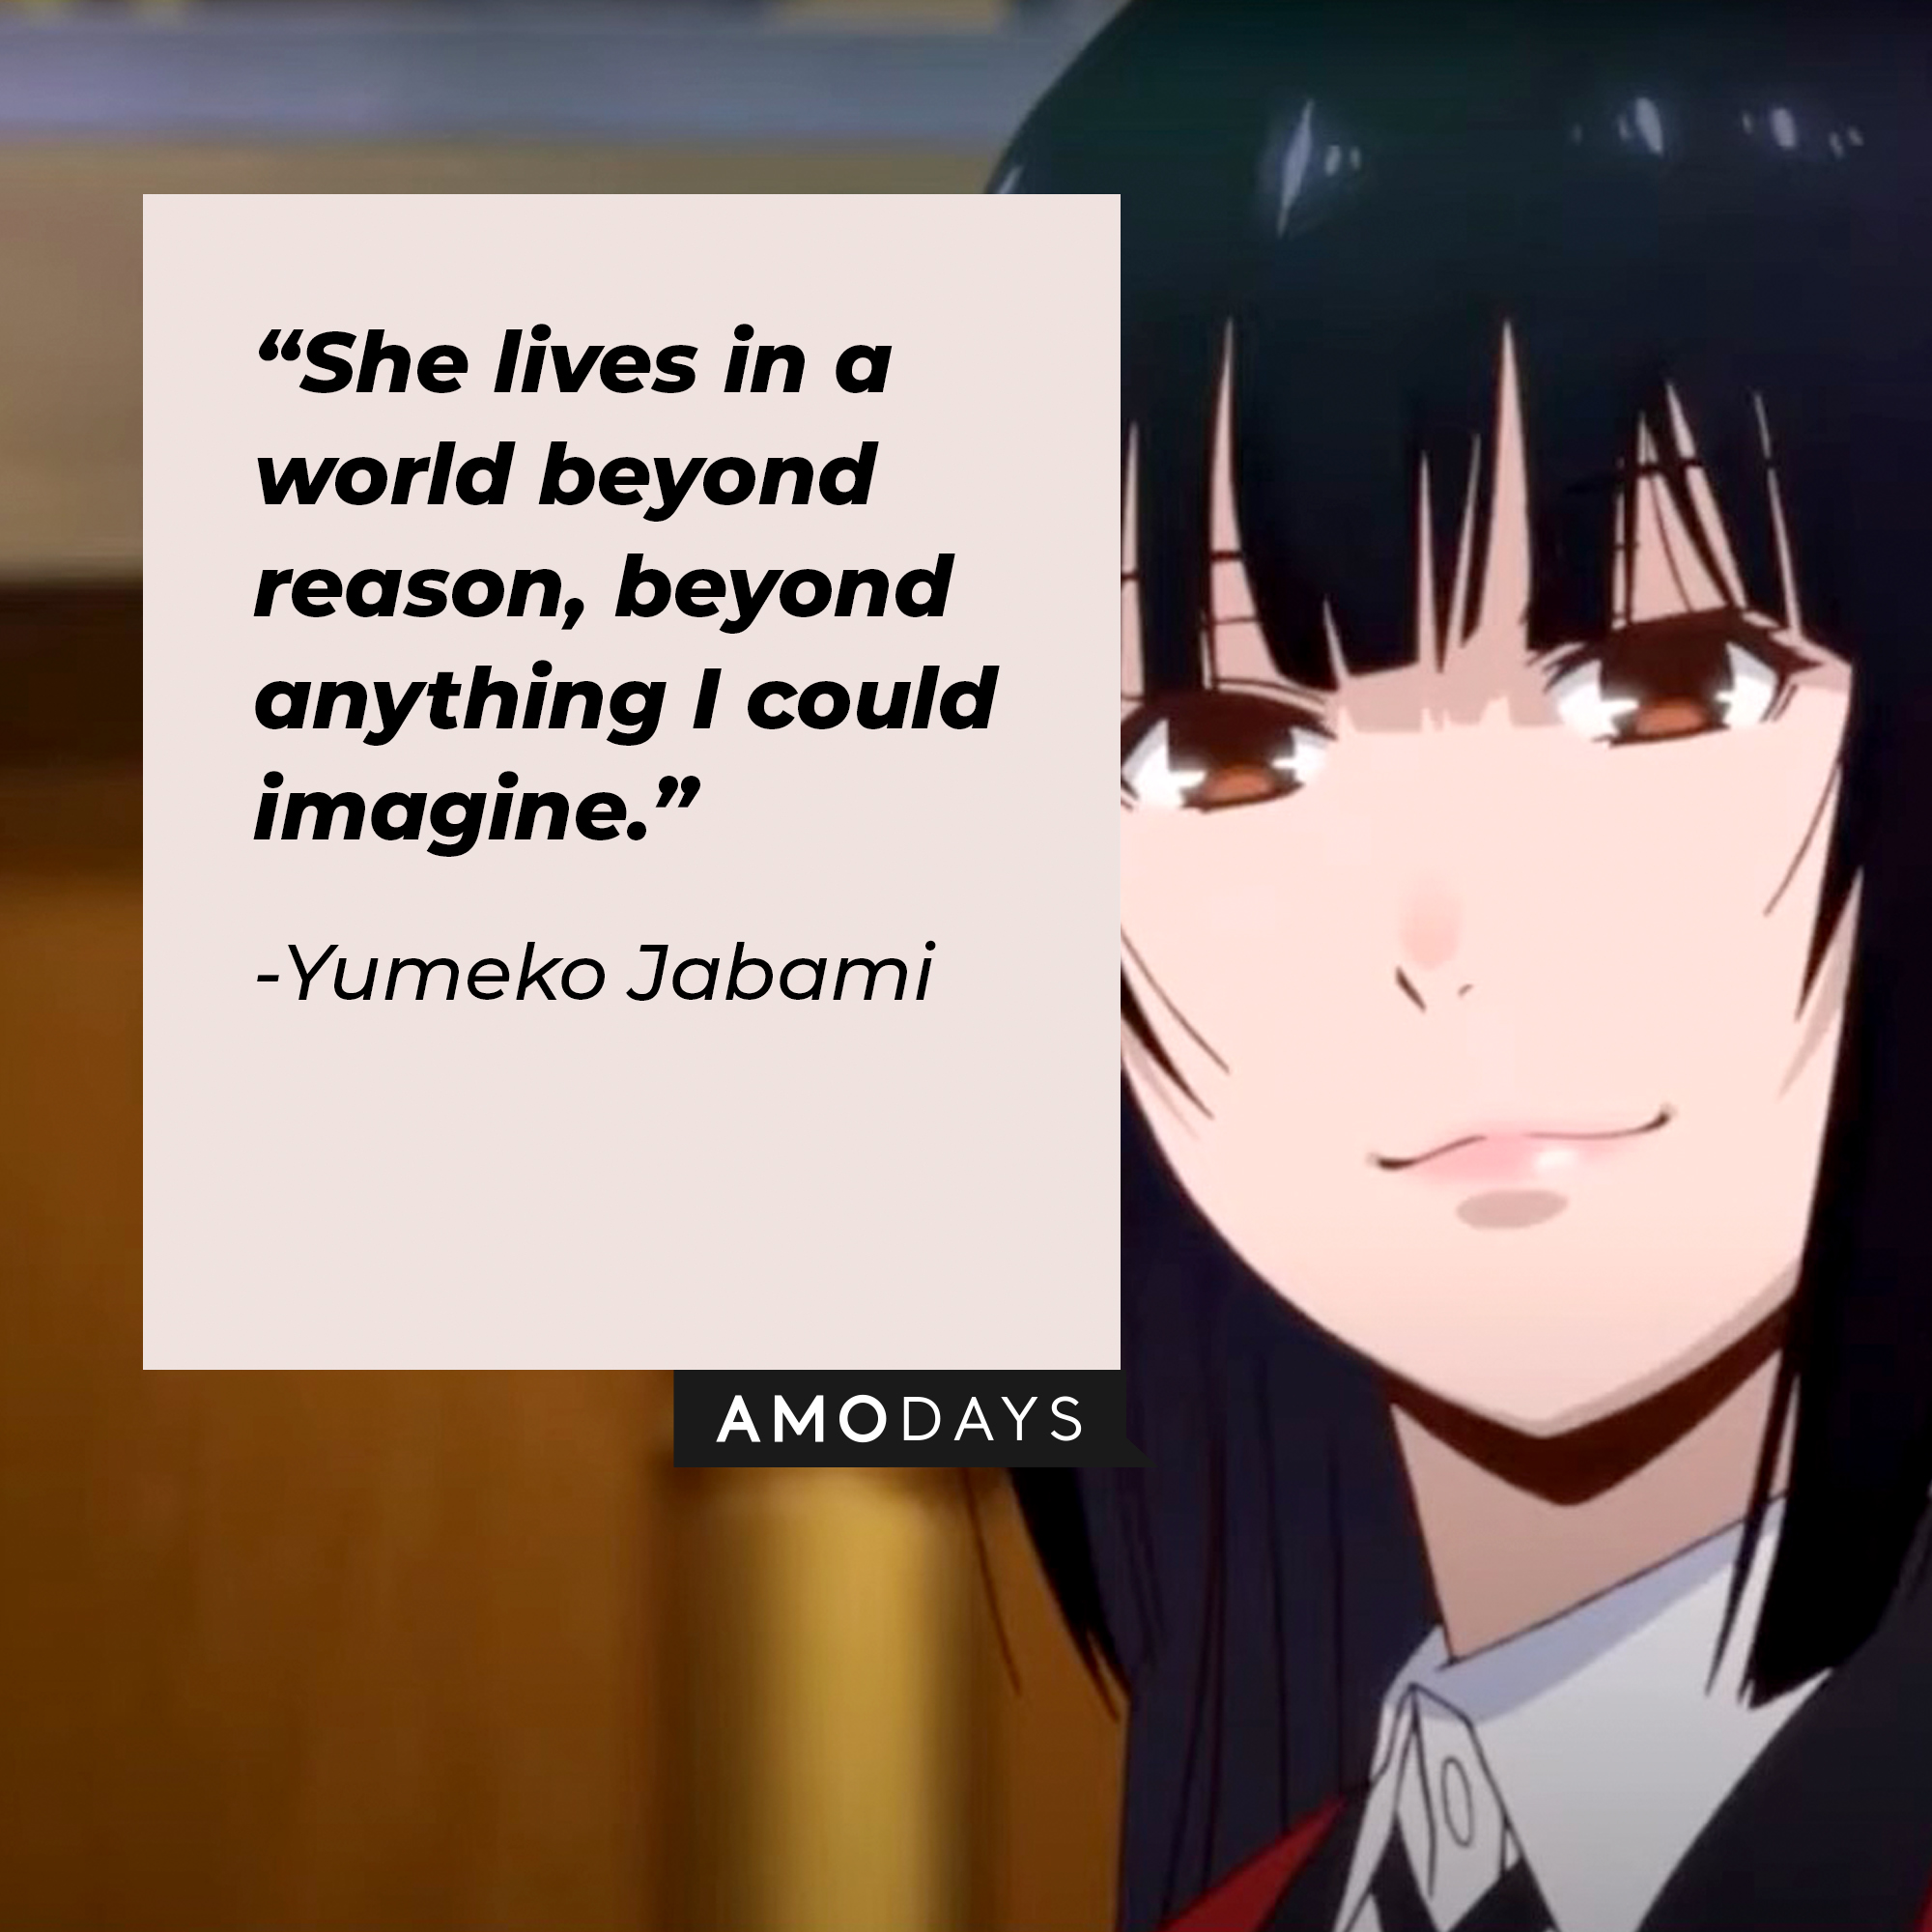 A picture of Yumeko Jabami with her quote: “She lives in a world beyond reason, beyond anything I could imagine.” | Source: youtube.com/netflixanime